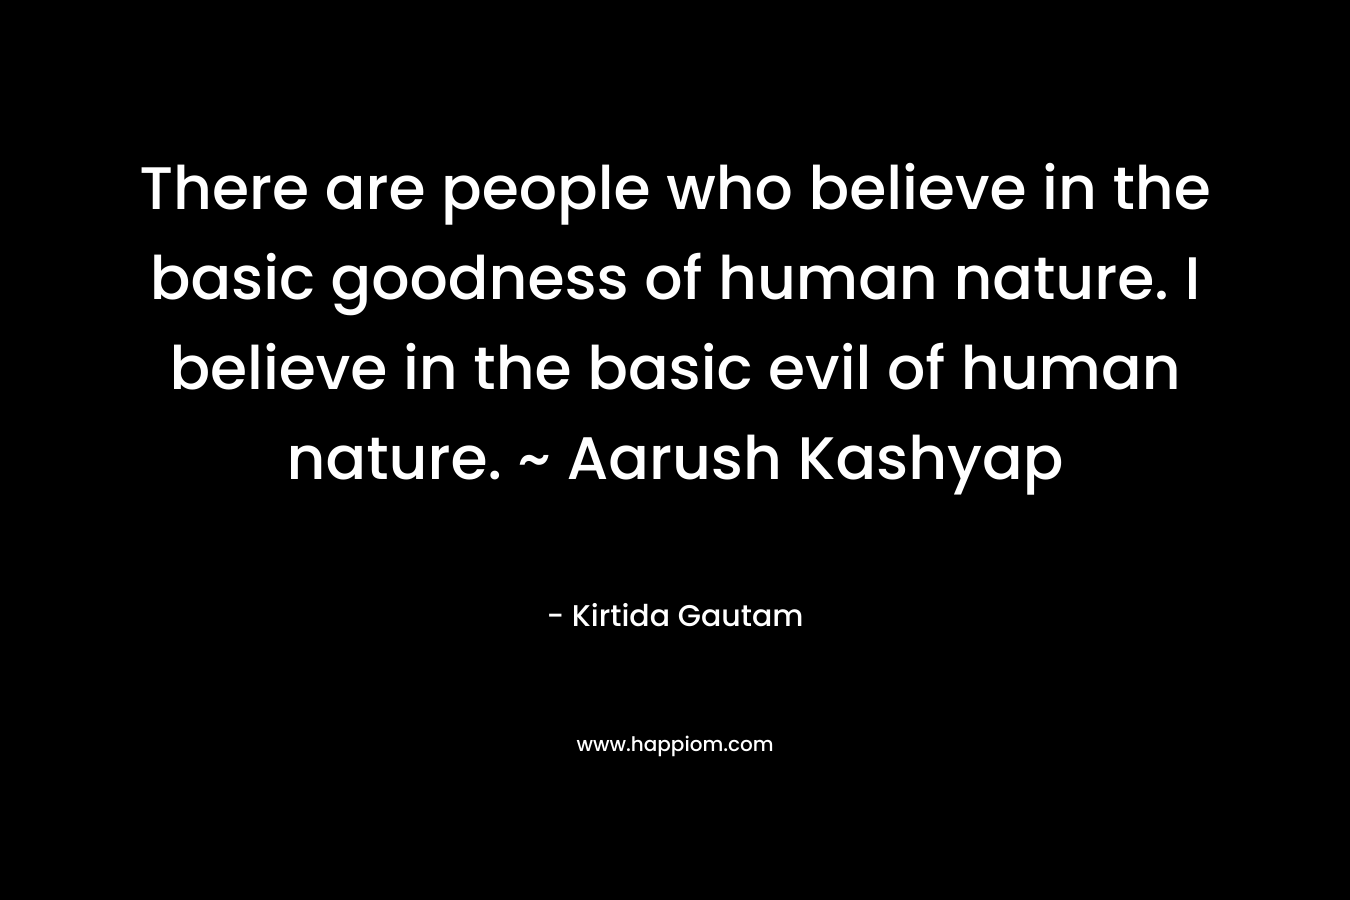 There are people who believe in the basic goodness of human nature. I believe in the basic evil of human nature. ~ Aarush Kashyap